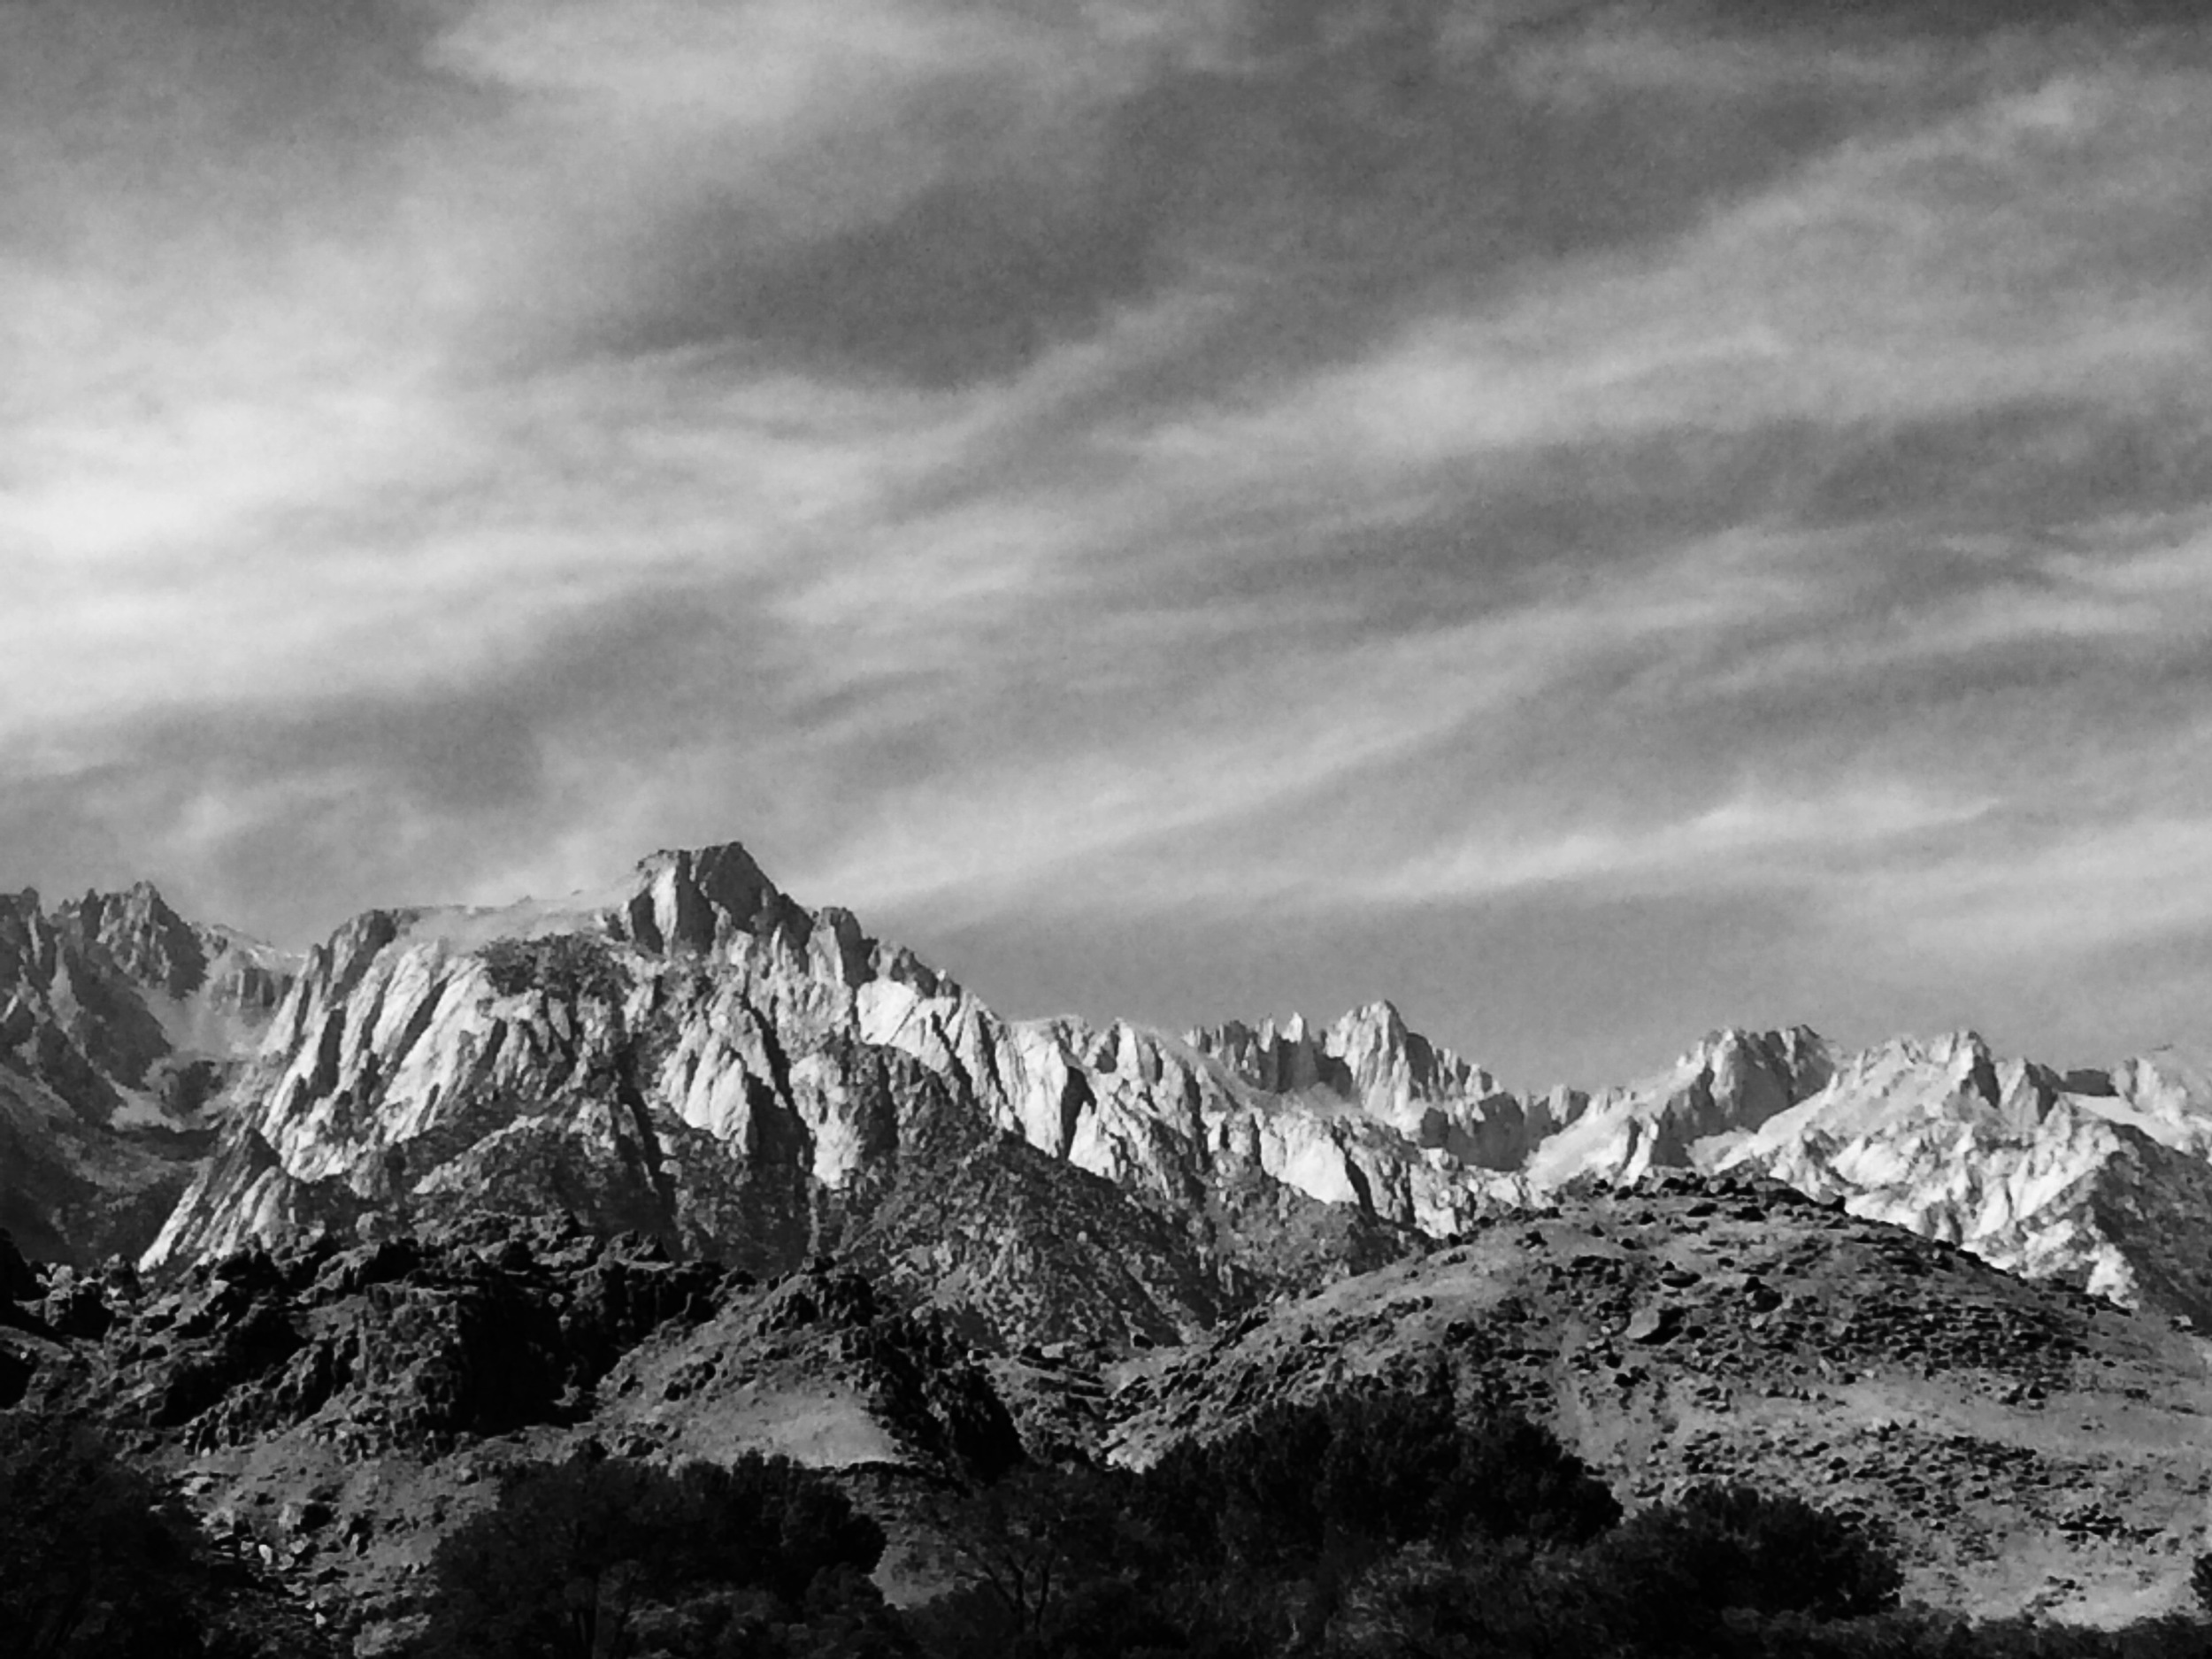  Mt. Whitney as seen from the Interagency Visitor Center in Lone Pine, where hikers go to pick up their permits. 